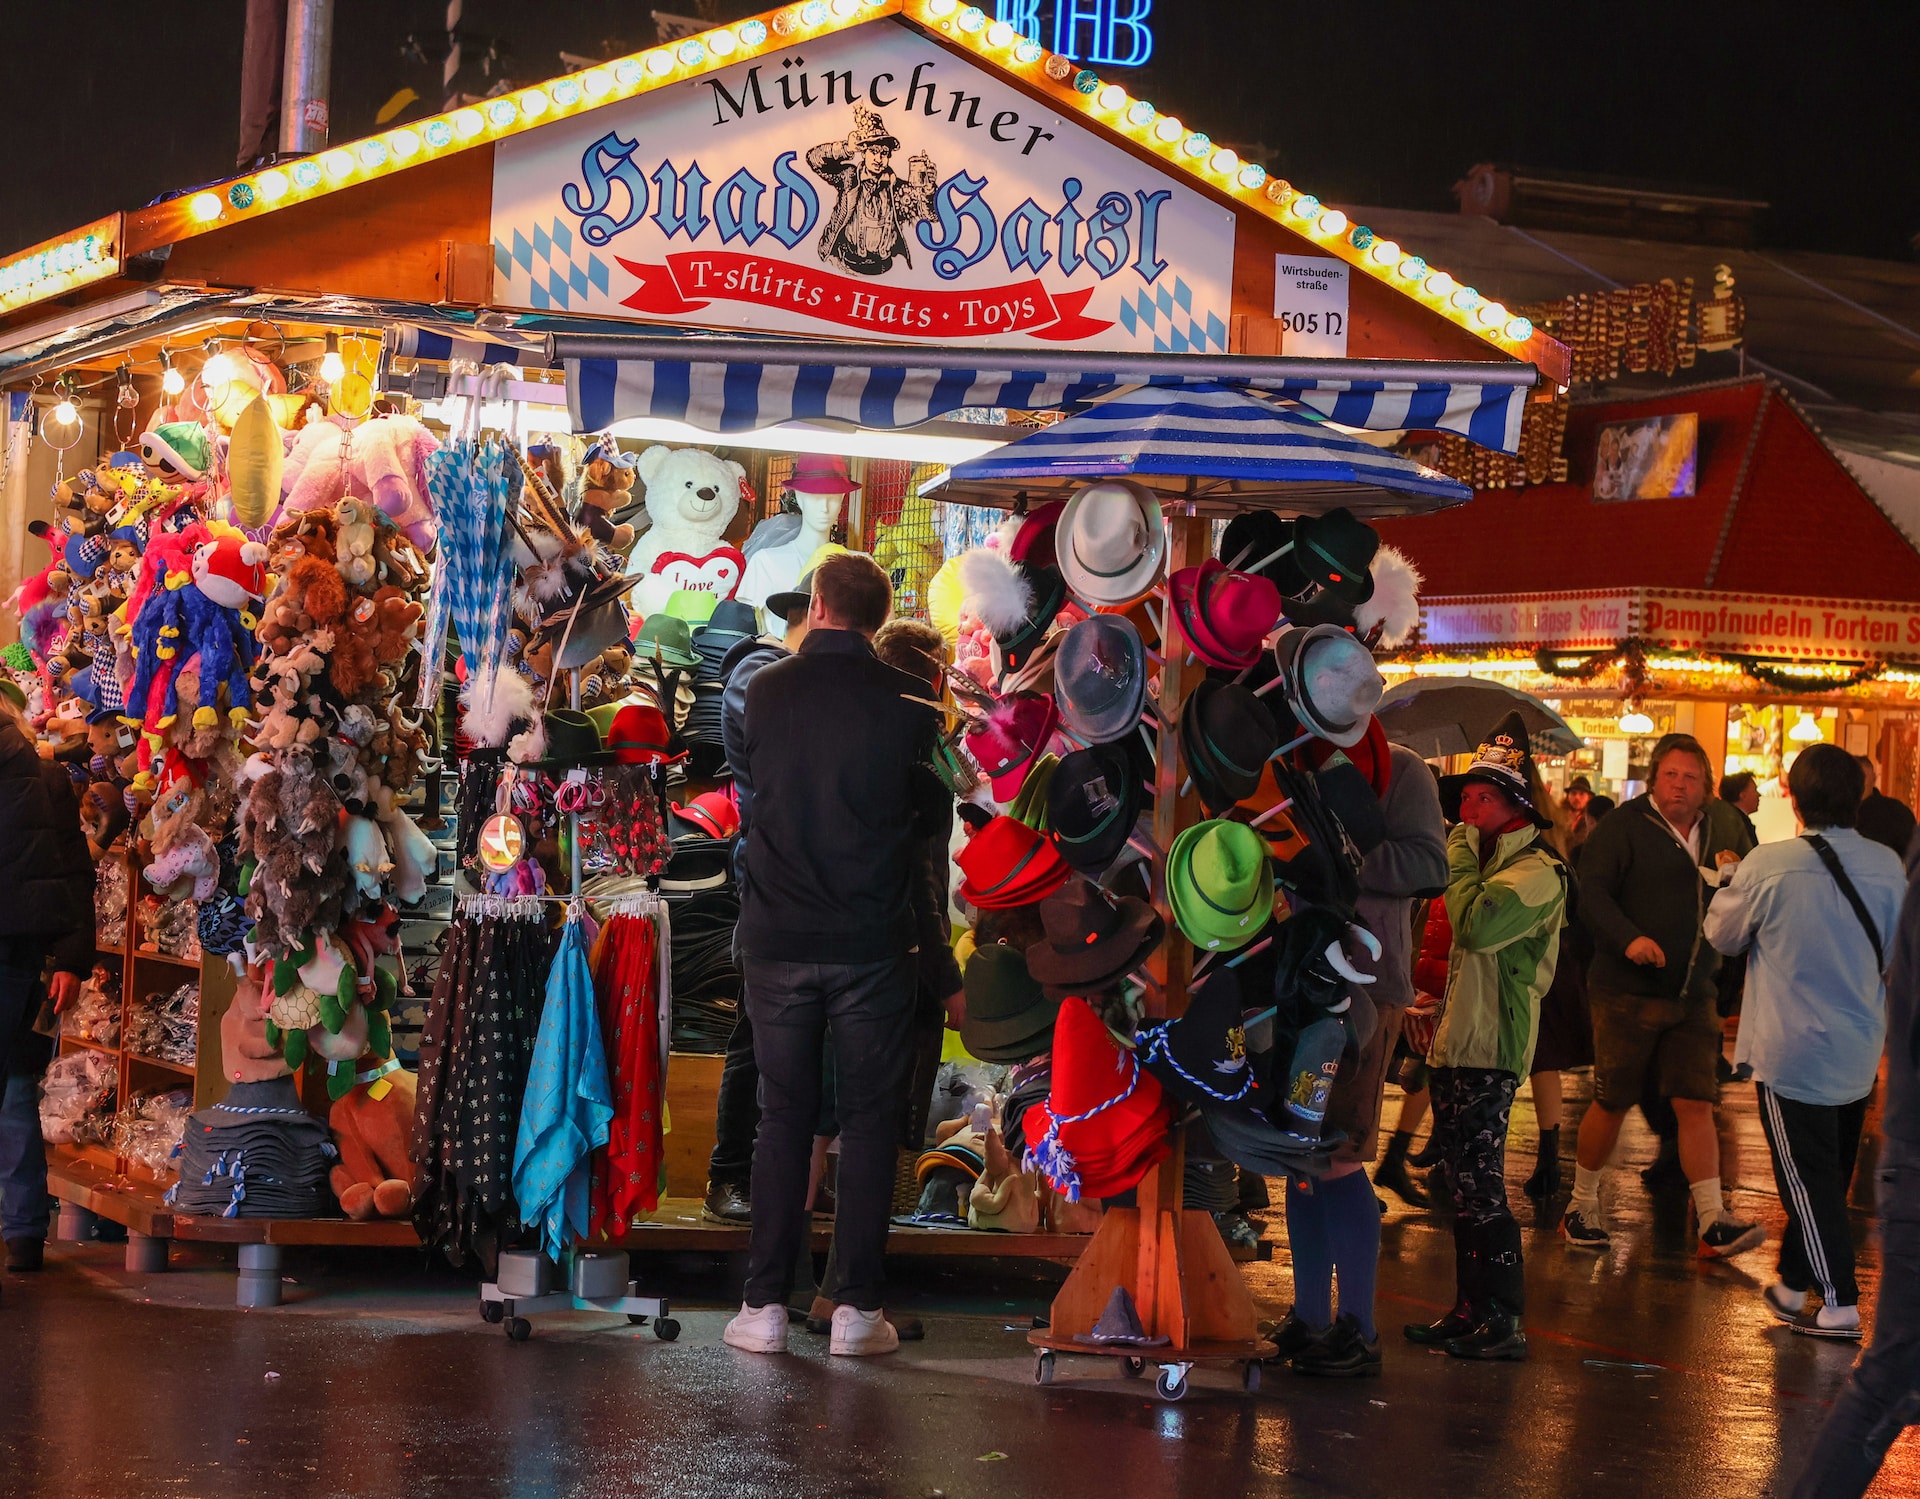 Charming image of a toy shop at Oktoberfest, radiating a lively atmosphere, capturing the spirit of the festive celebration.